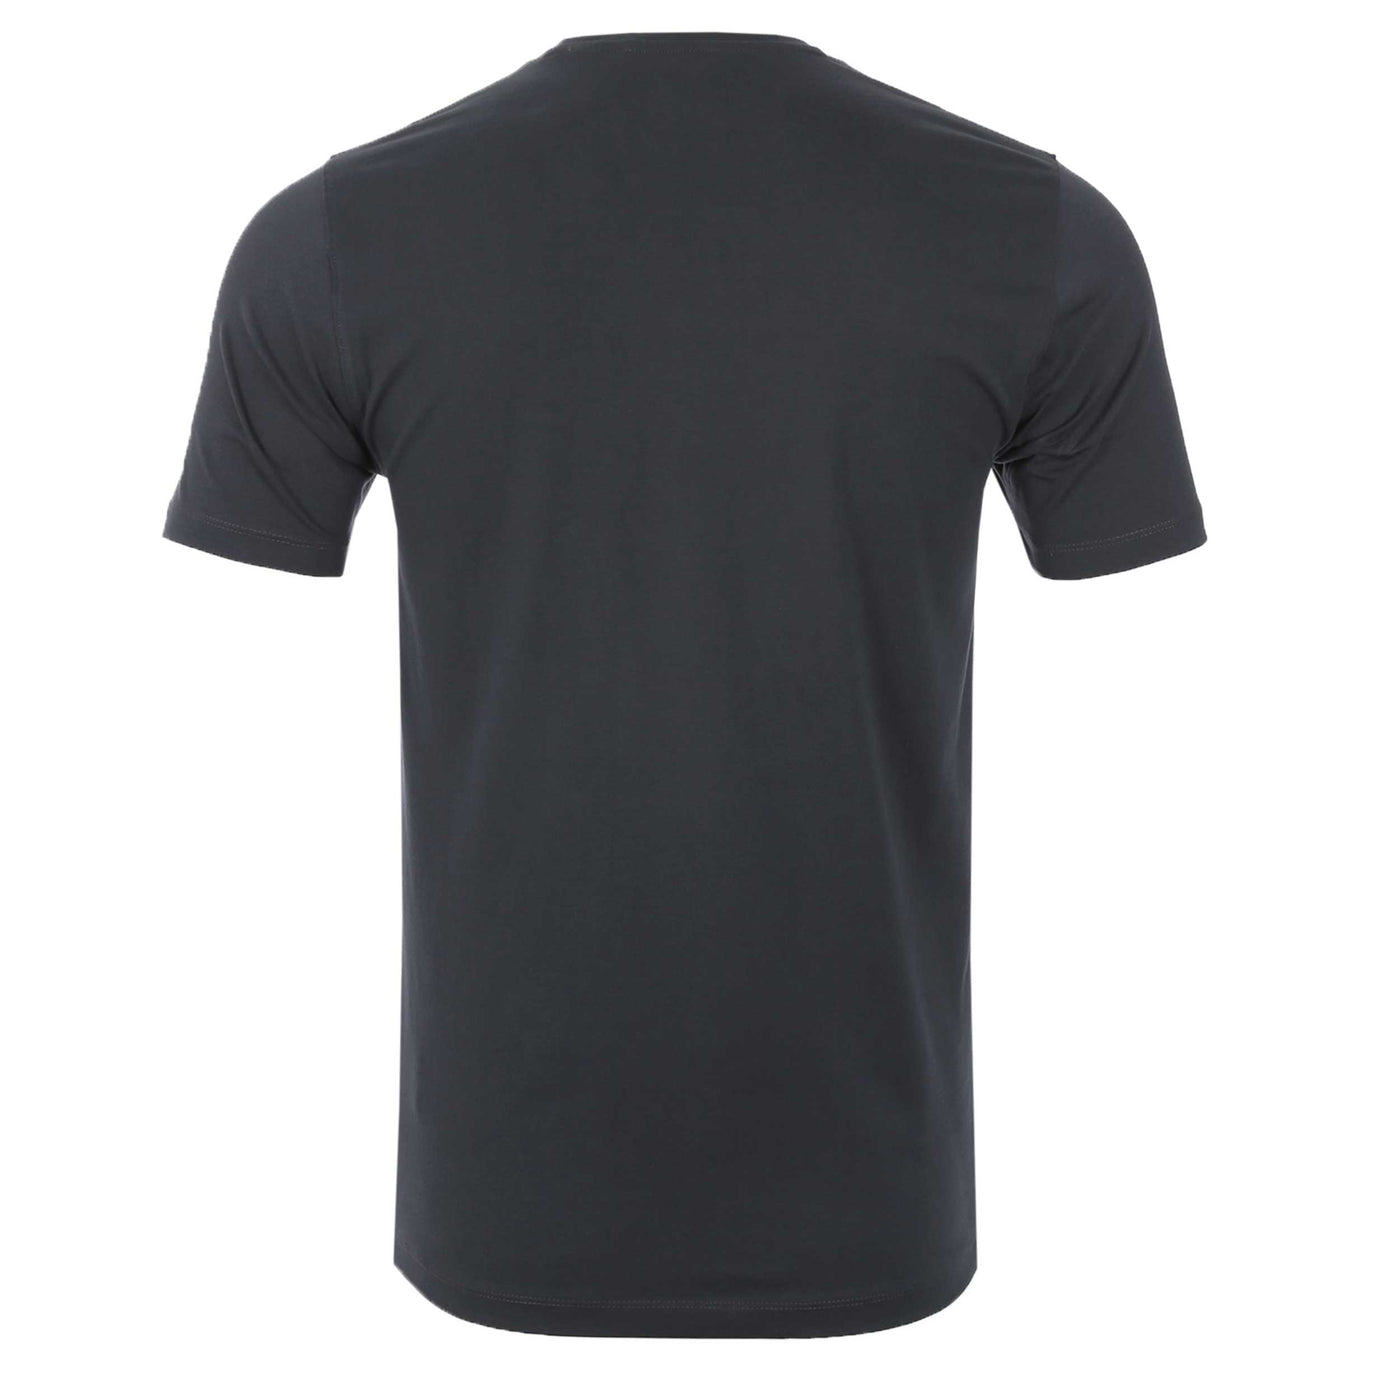 Remus Uomo Basic Crew Neck T Shirt in Charcoal Back